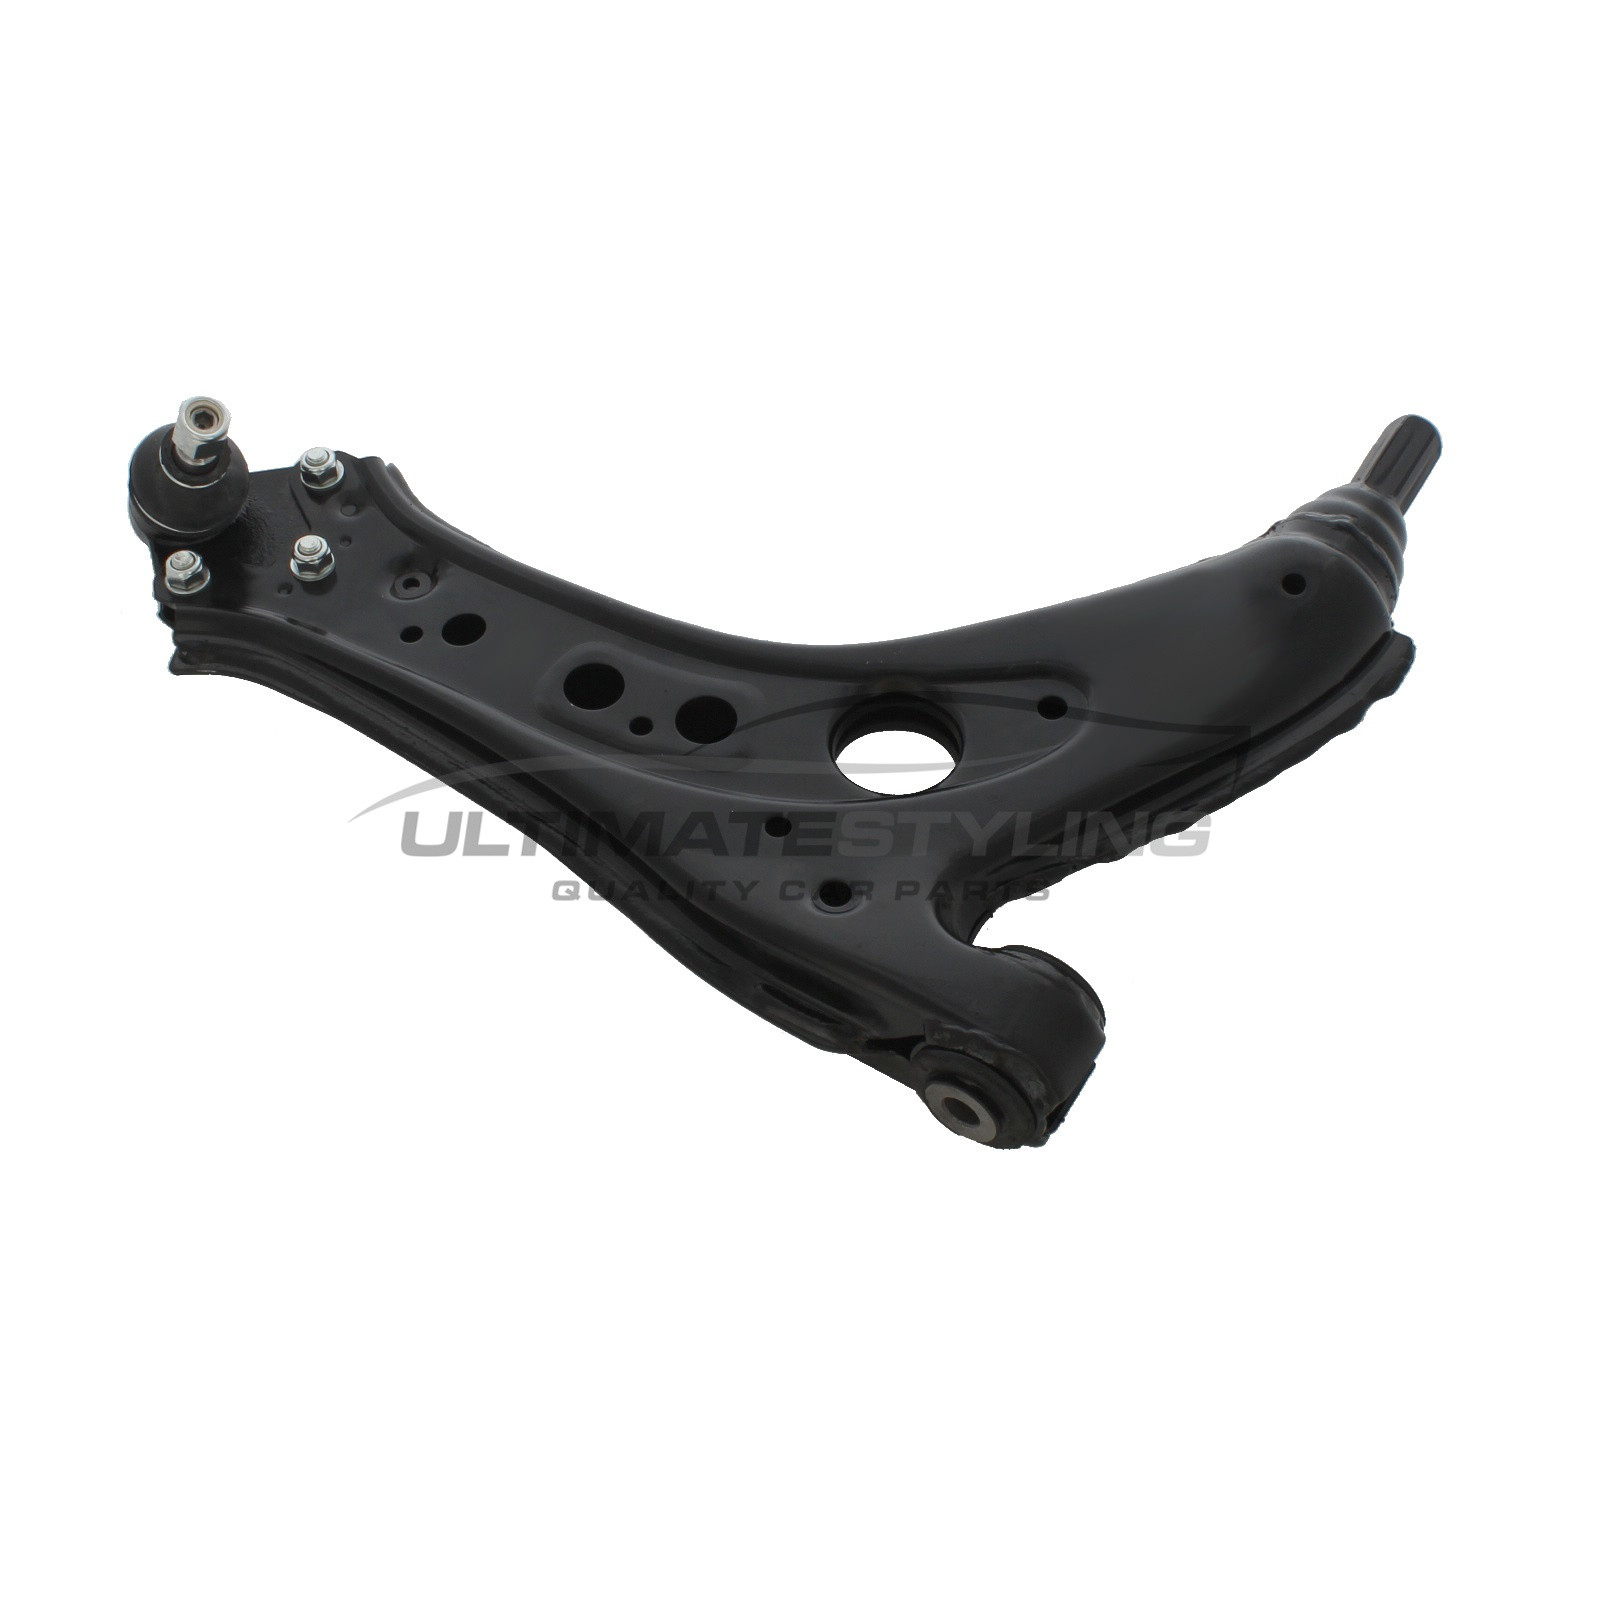 Seat Cordoba 2002-2006, Seat Ibiza 2002-2008, Skoda Fabia 2000-2010, Skoda Roomster 2006-2008, VW Fox 2006-2012, VW Polo 2002-2010 Front Lower Suspension Arm (Steel) Including Ball Joint Excluding Rear Bush Driver Side (RH)